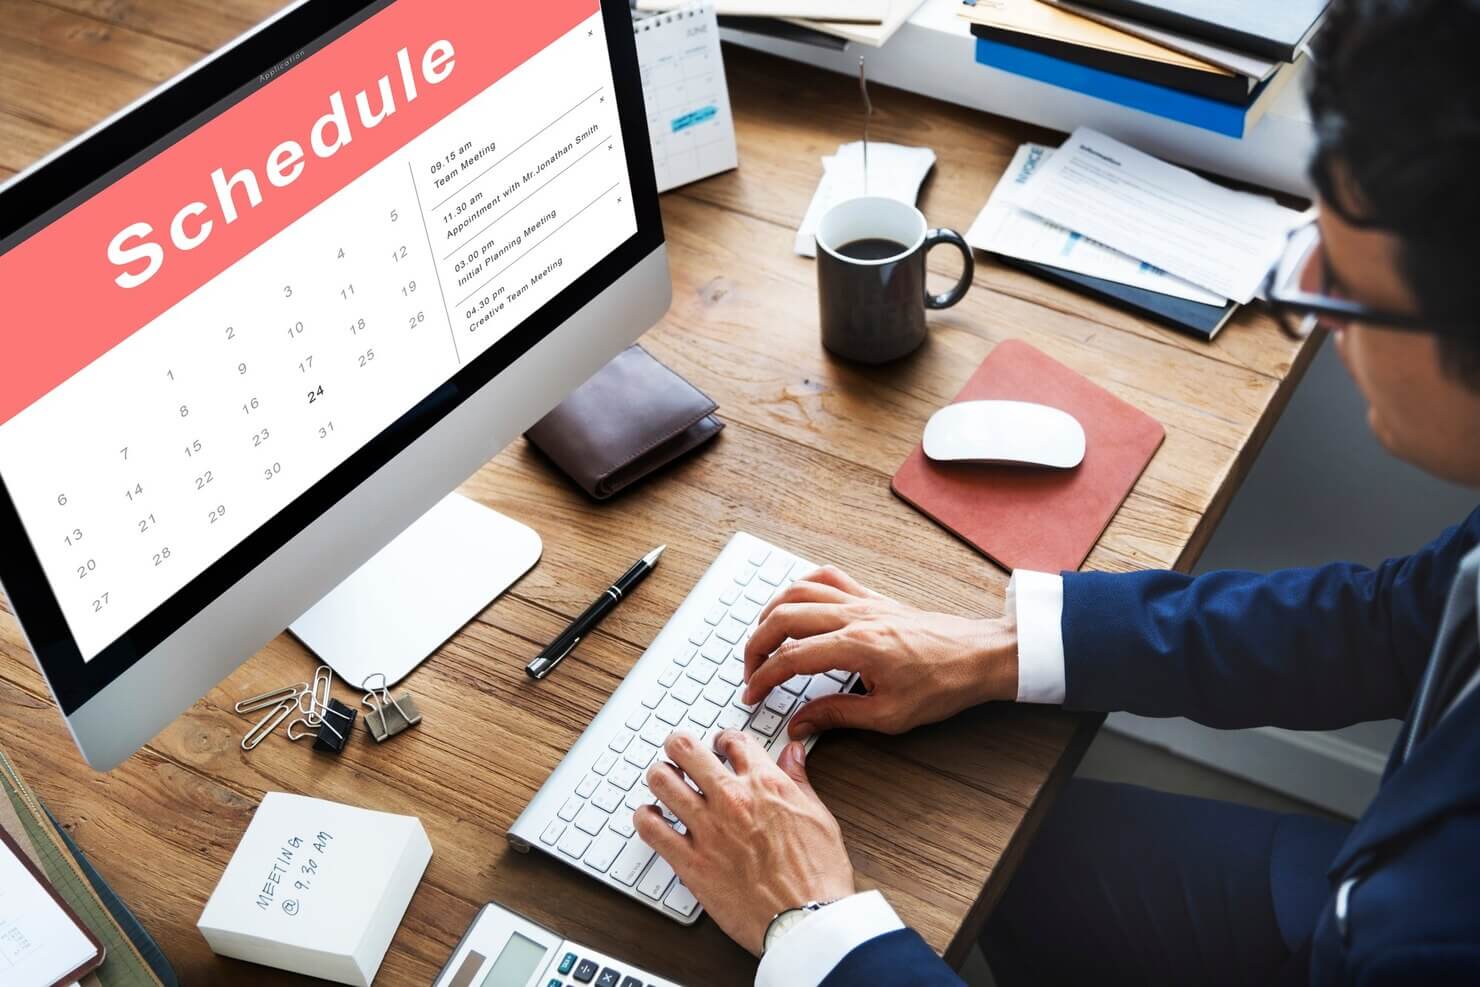 Appointment schedule calendar on a WordPress site. User booking an appointment on an interactive calendar